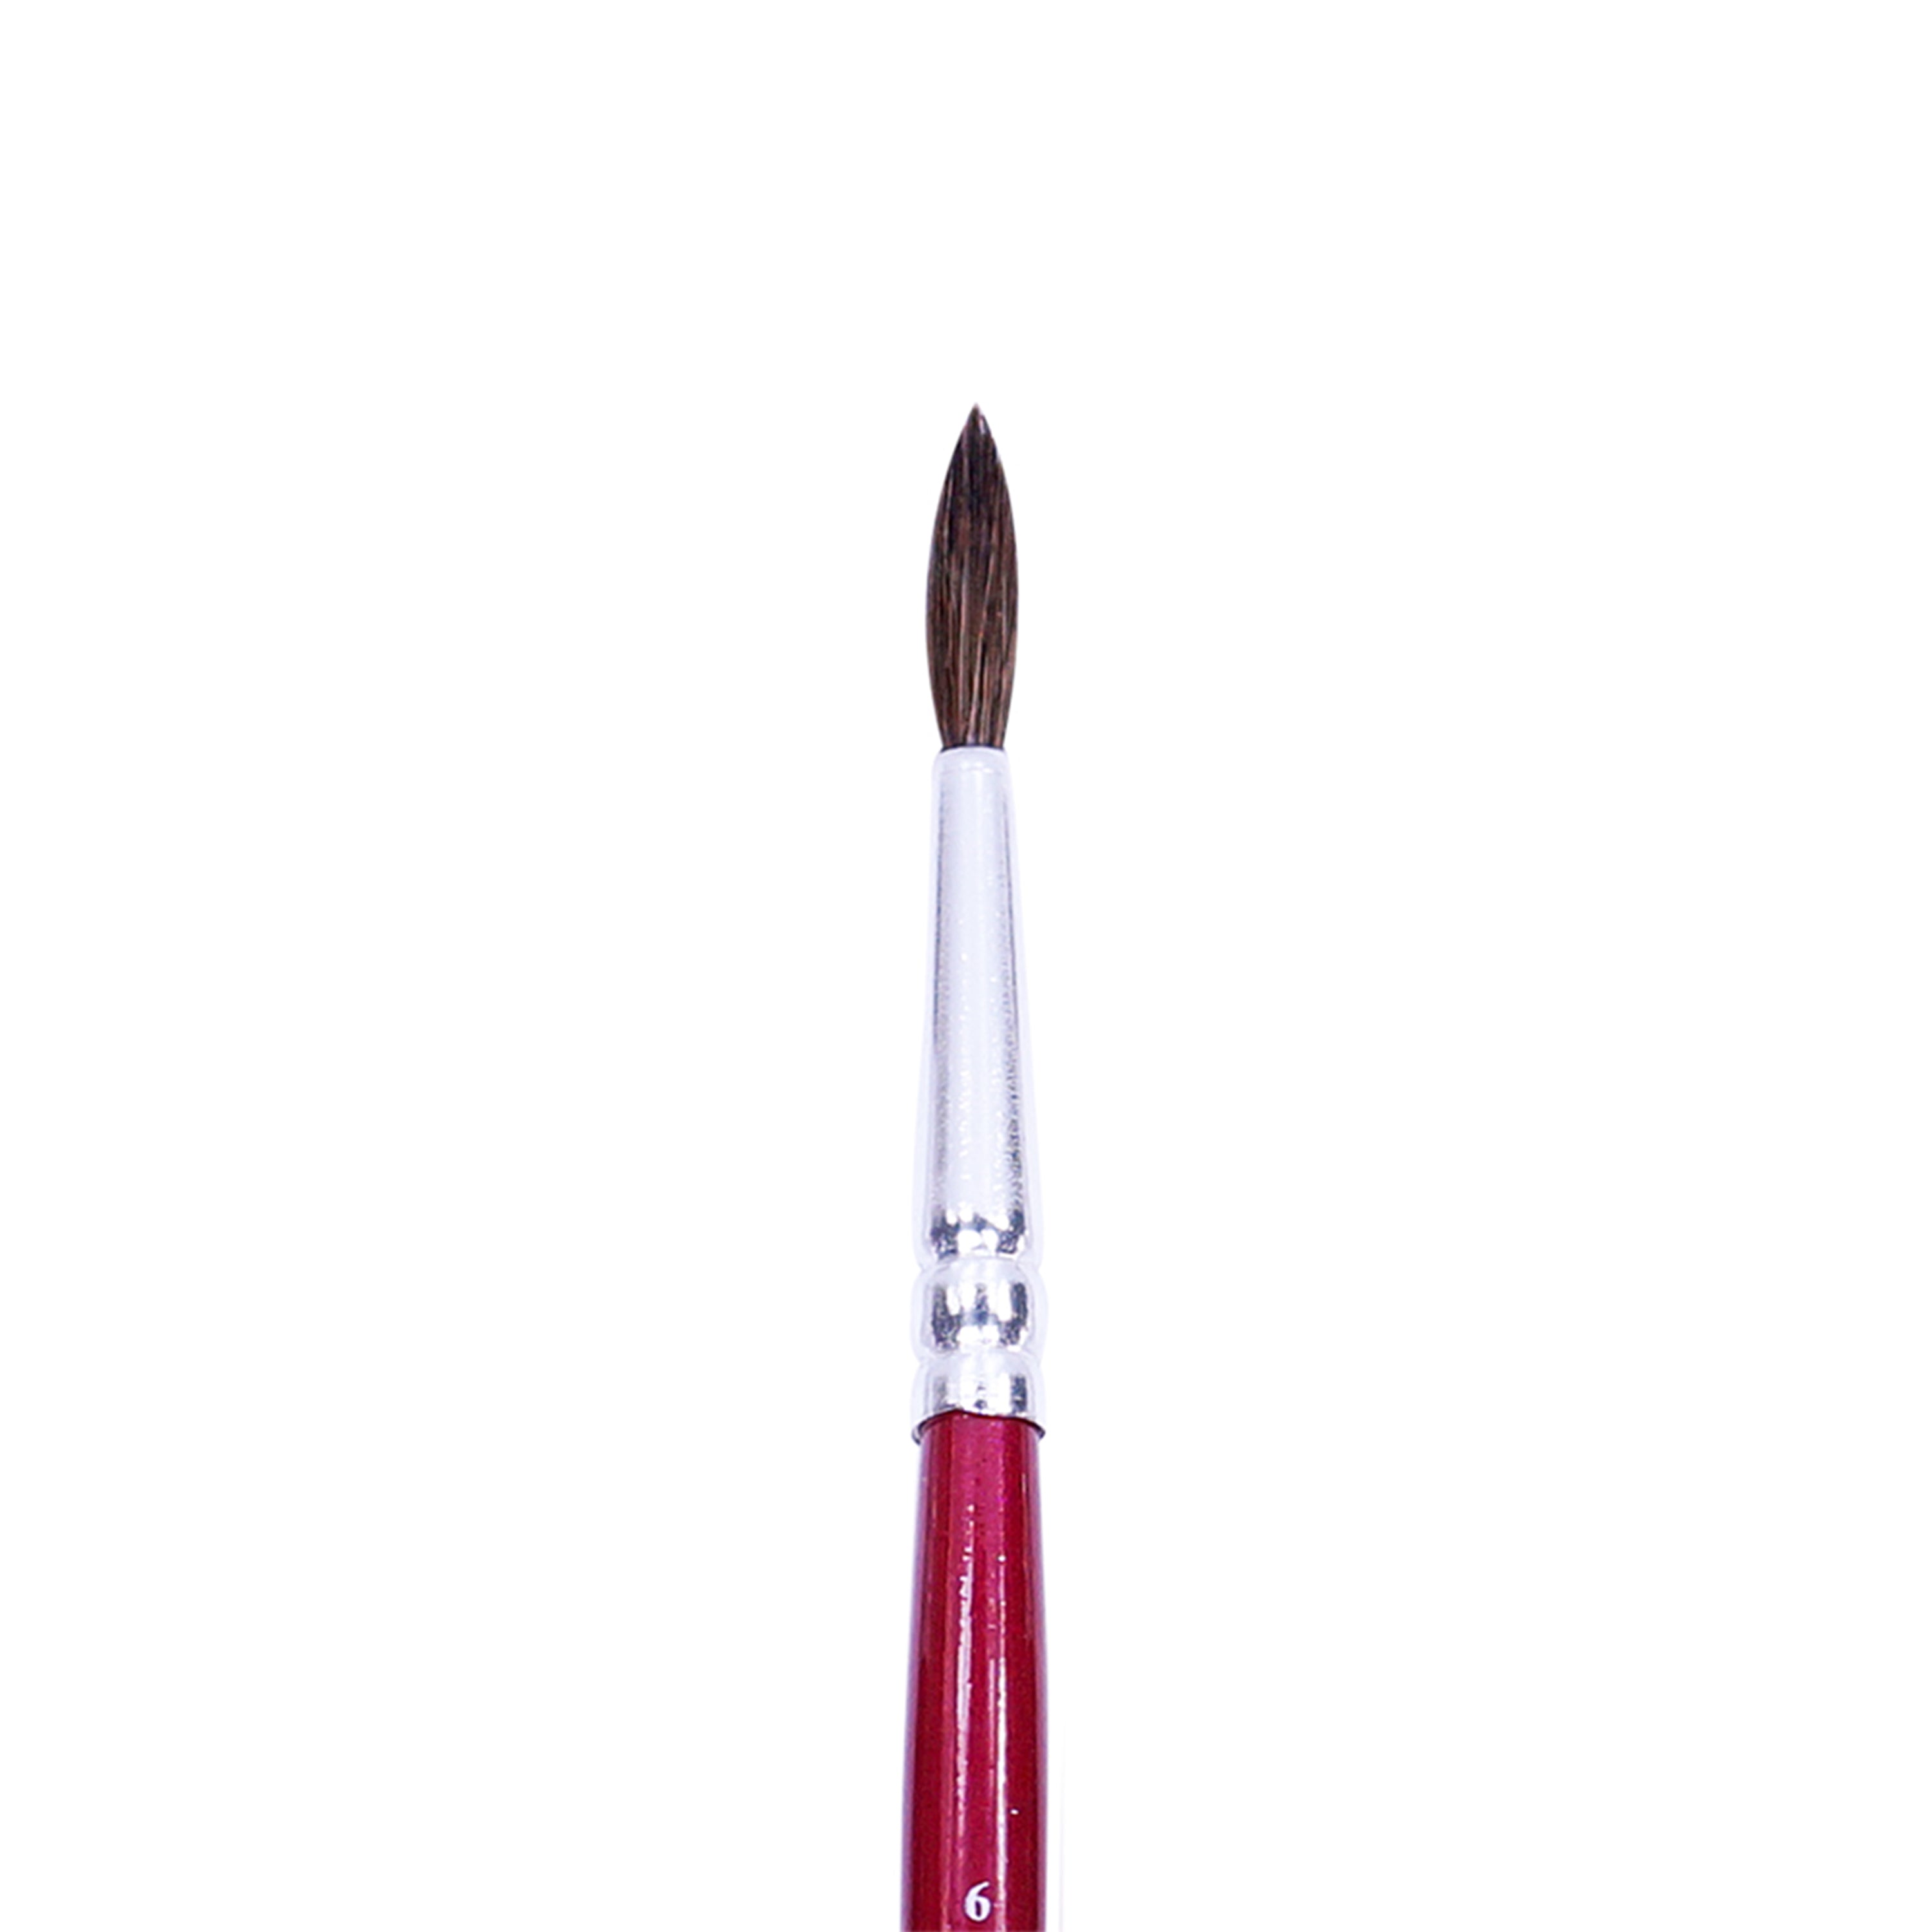 Faber Castell Paint Brush - Pony Hair Round Size 6, 1pc